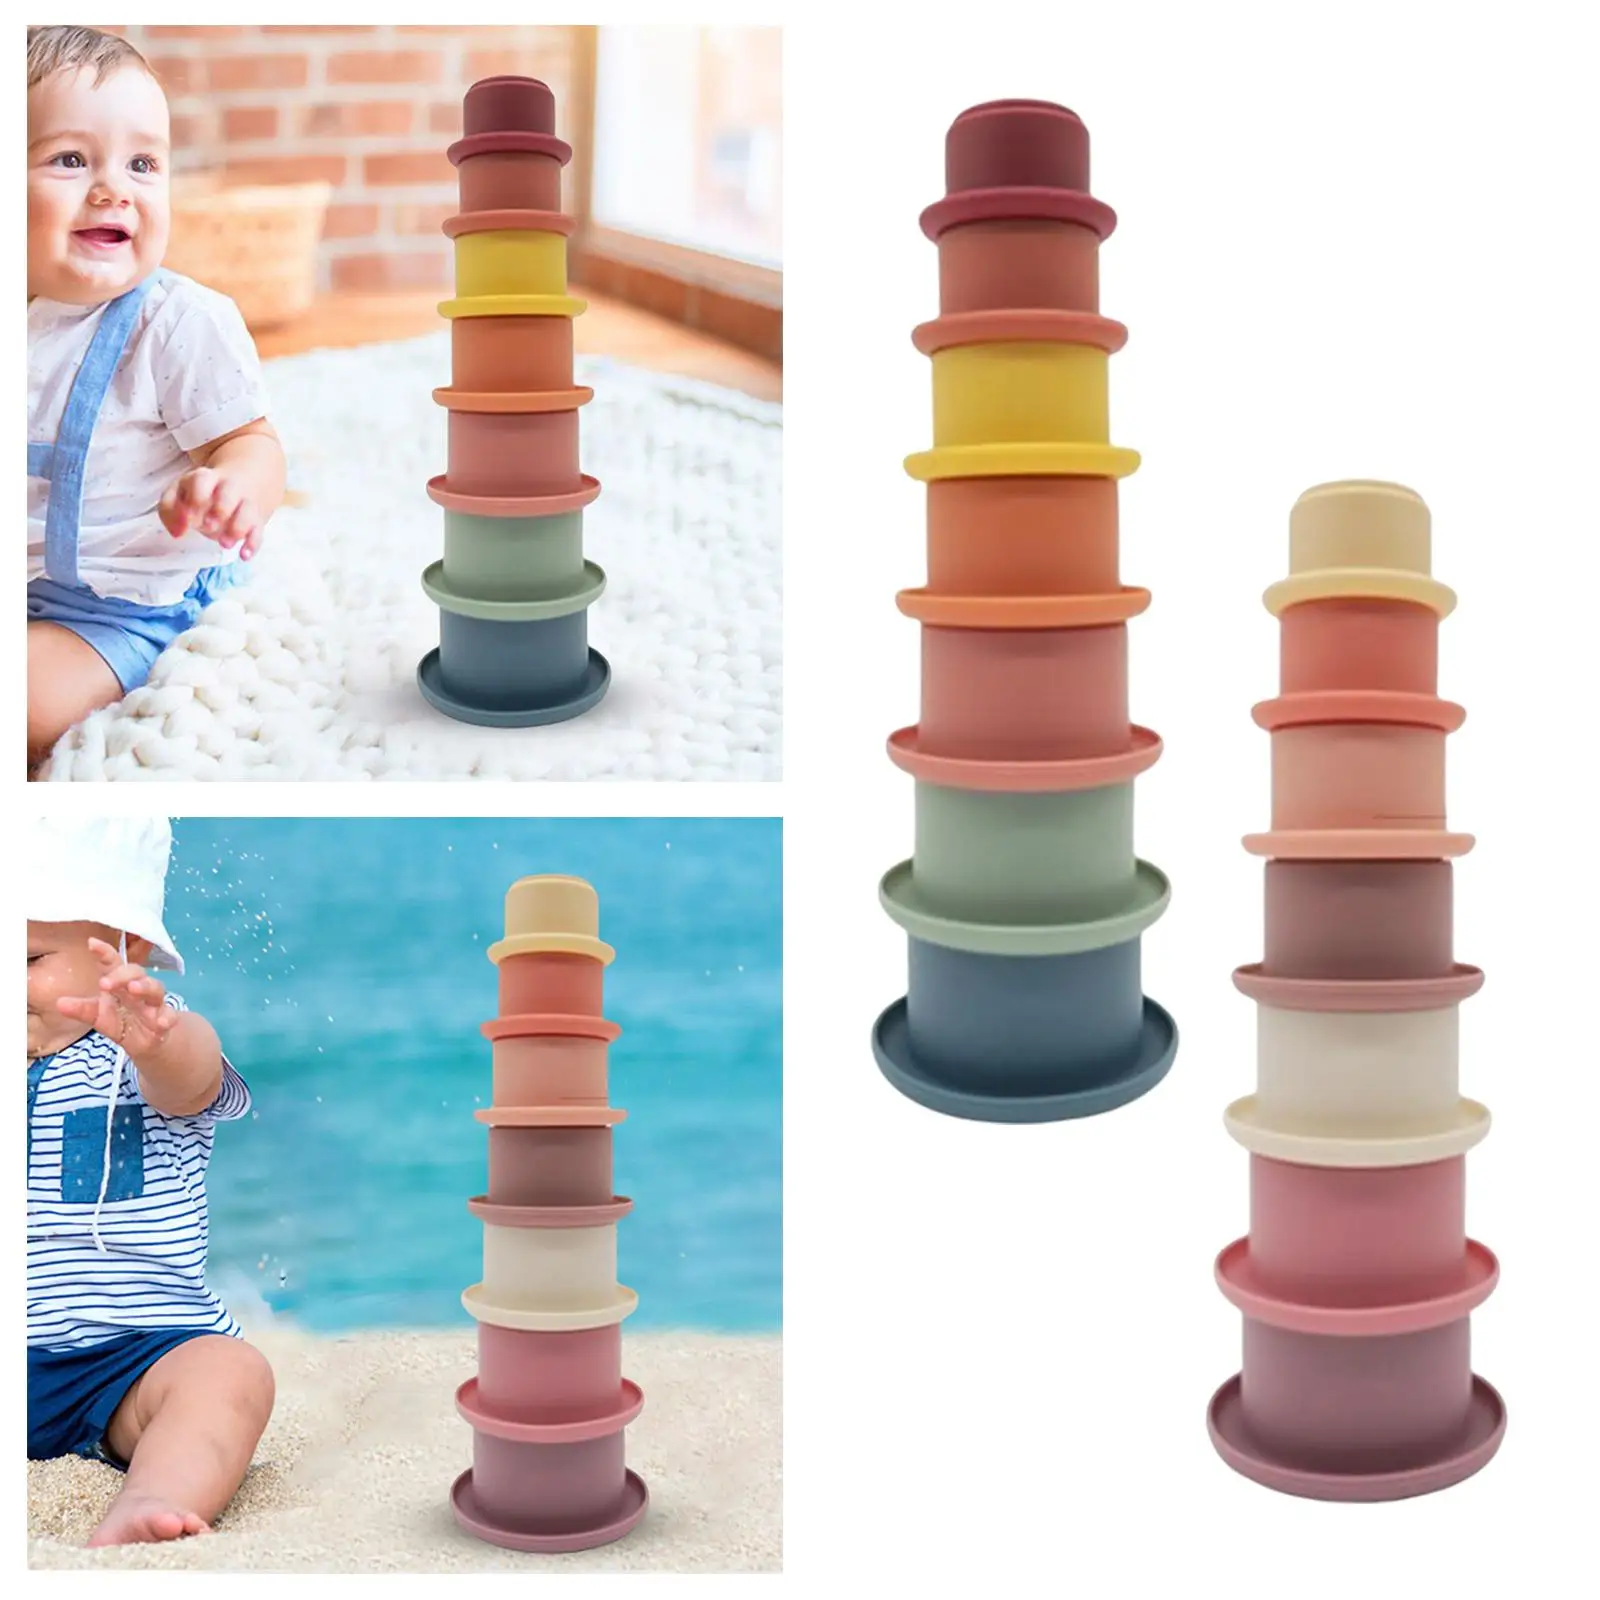 7Pcs Fun Stacking Cups Toy Learning Sorting and Building Blocks Silicone Montessori Stack up Cup for Boys Girls Toddler Baby